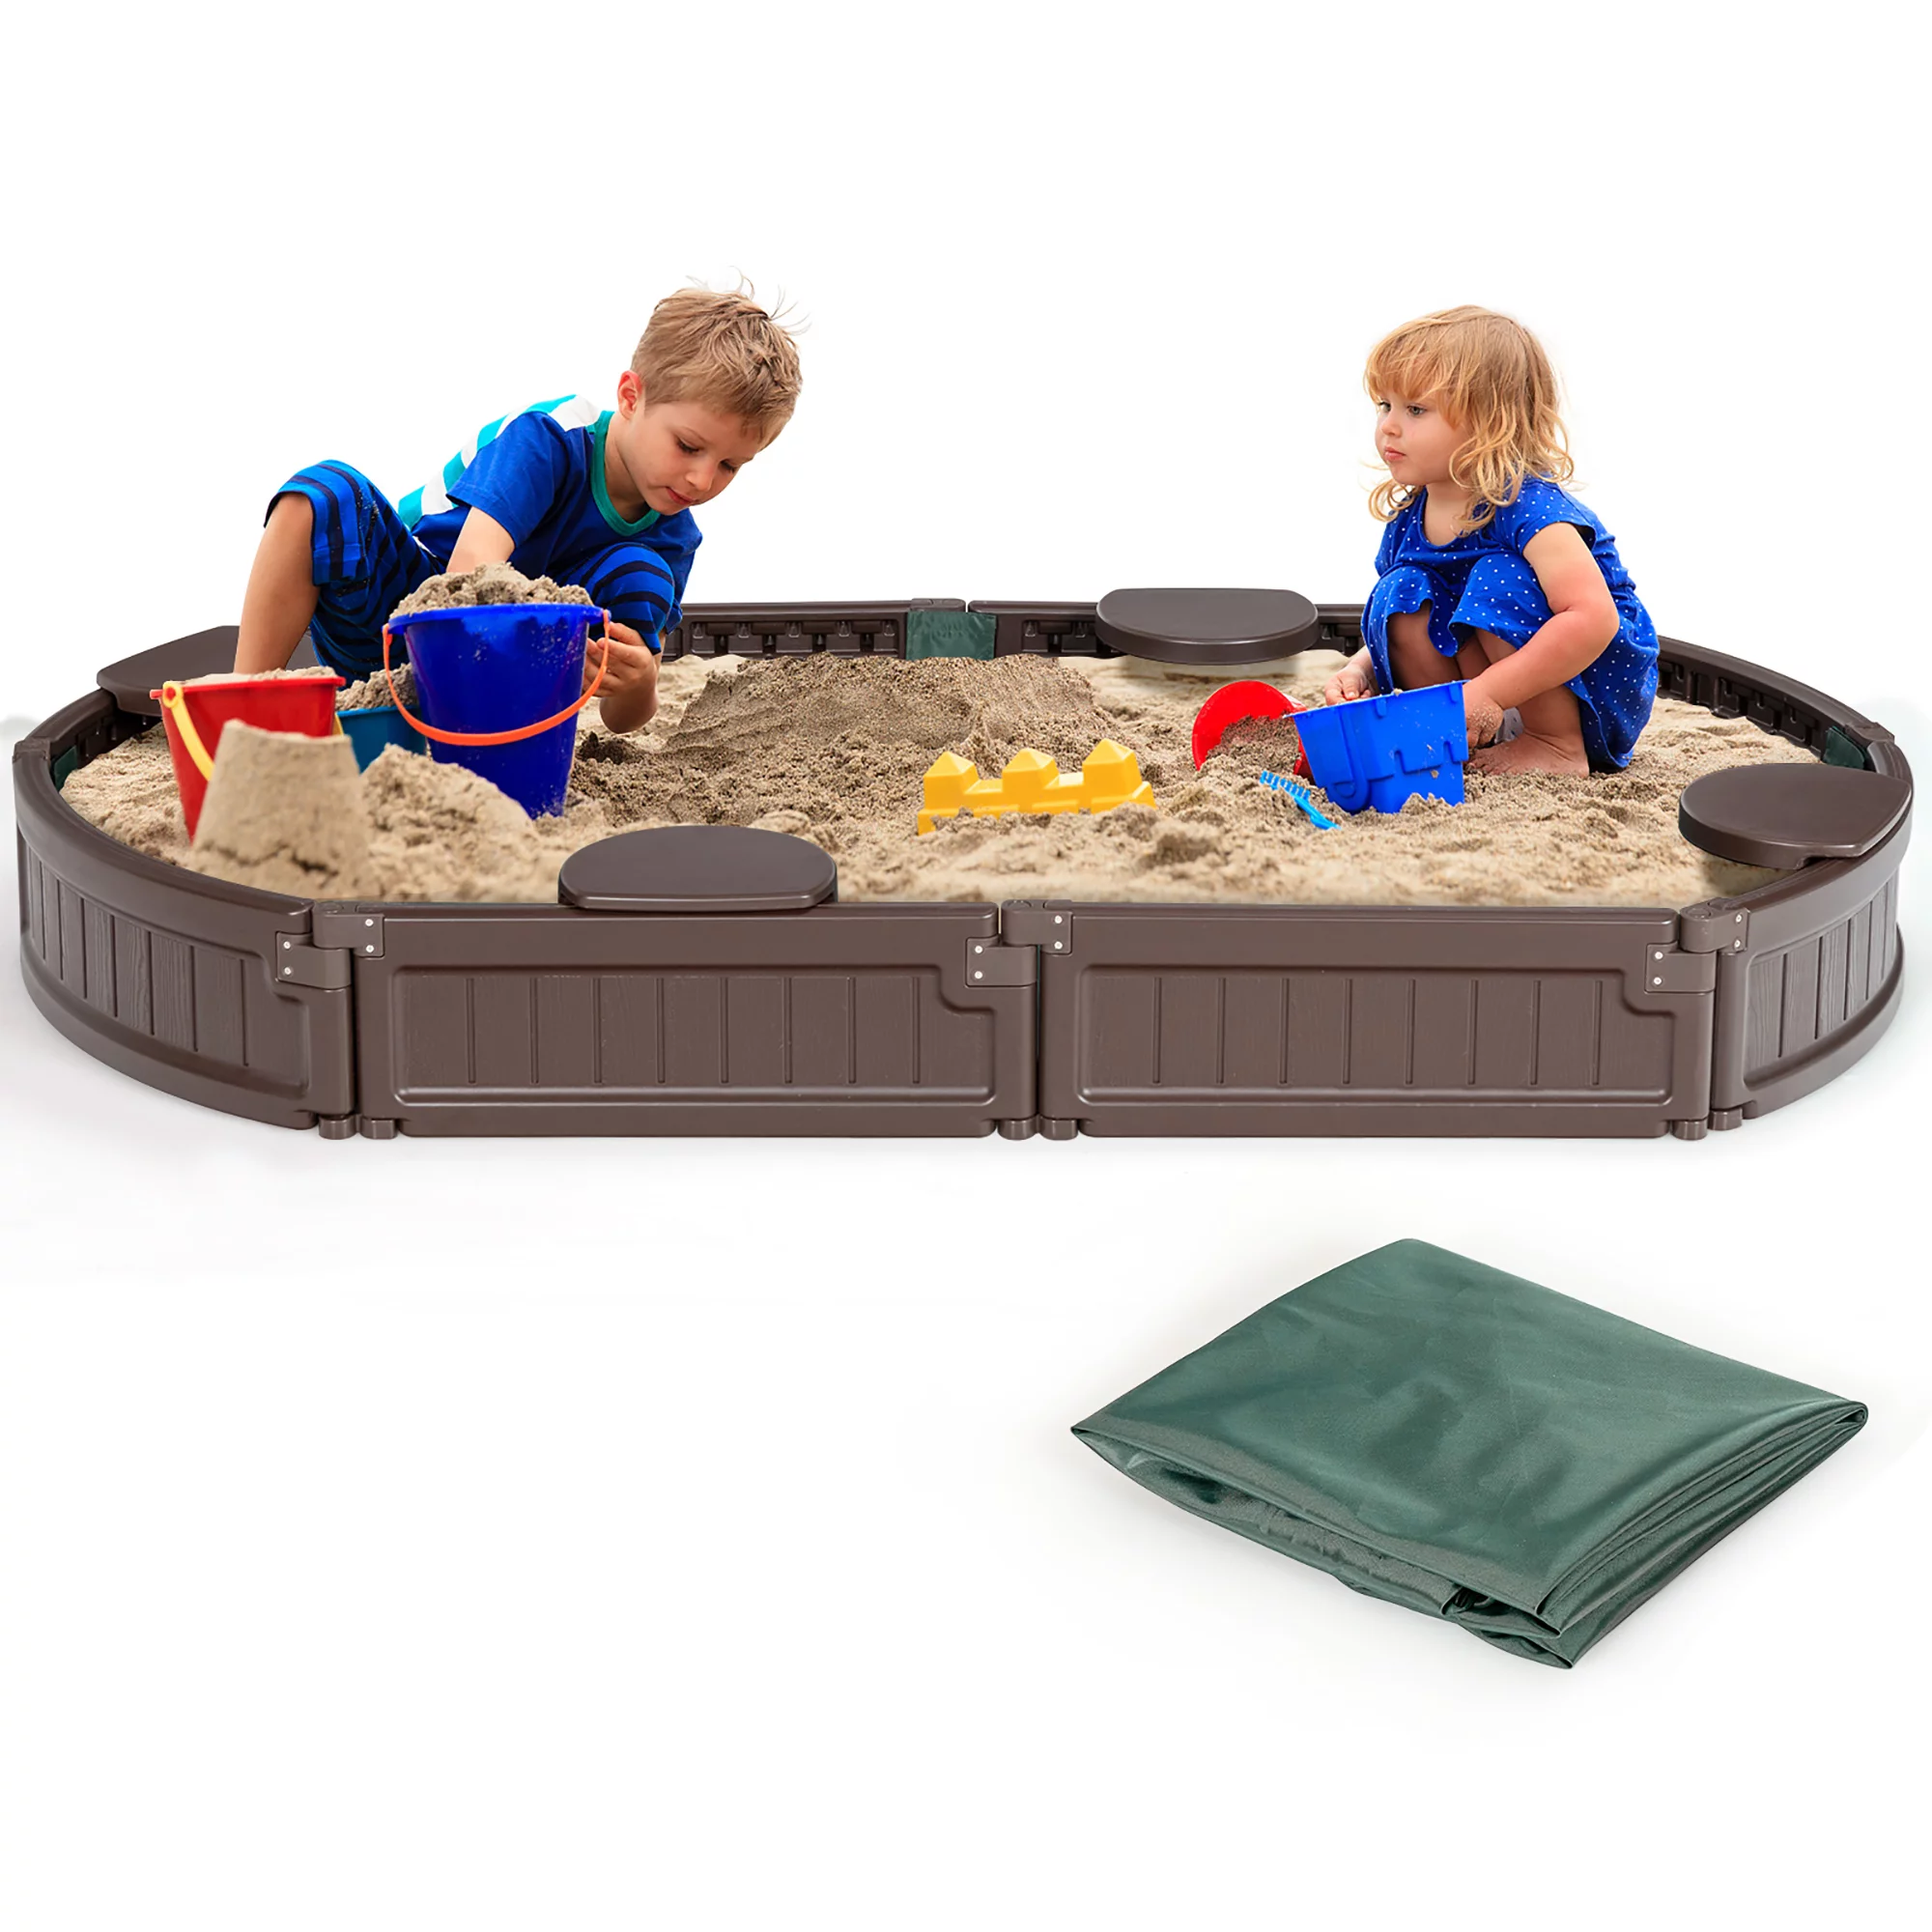 Costway 6F Wooden Sandbox w/Built-in Corner Seat, Cover, Bottom Liner for Outdoor Play Now $129.99 was $187.00